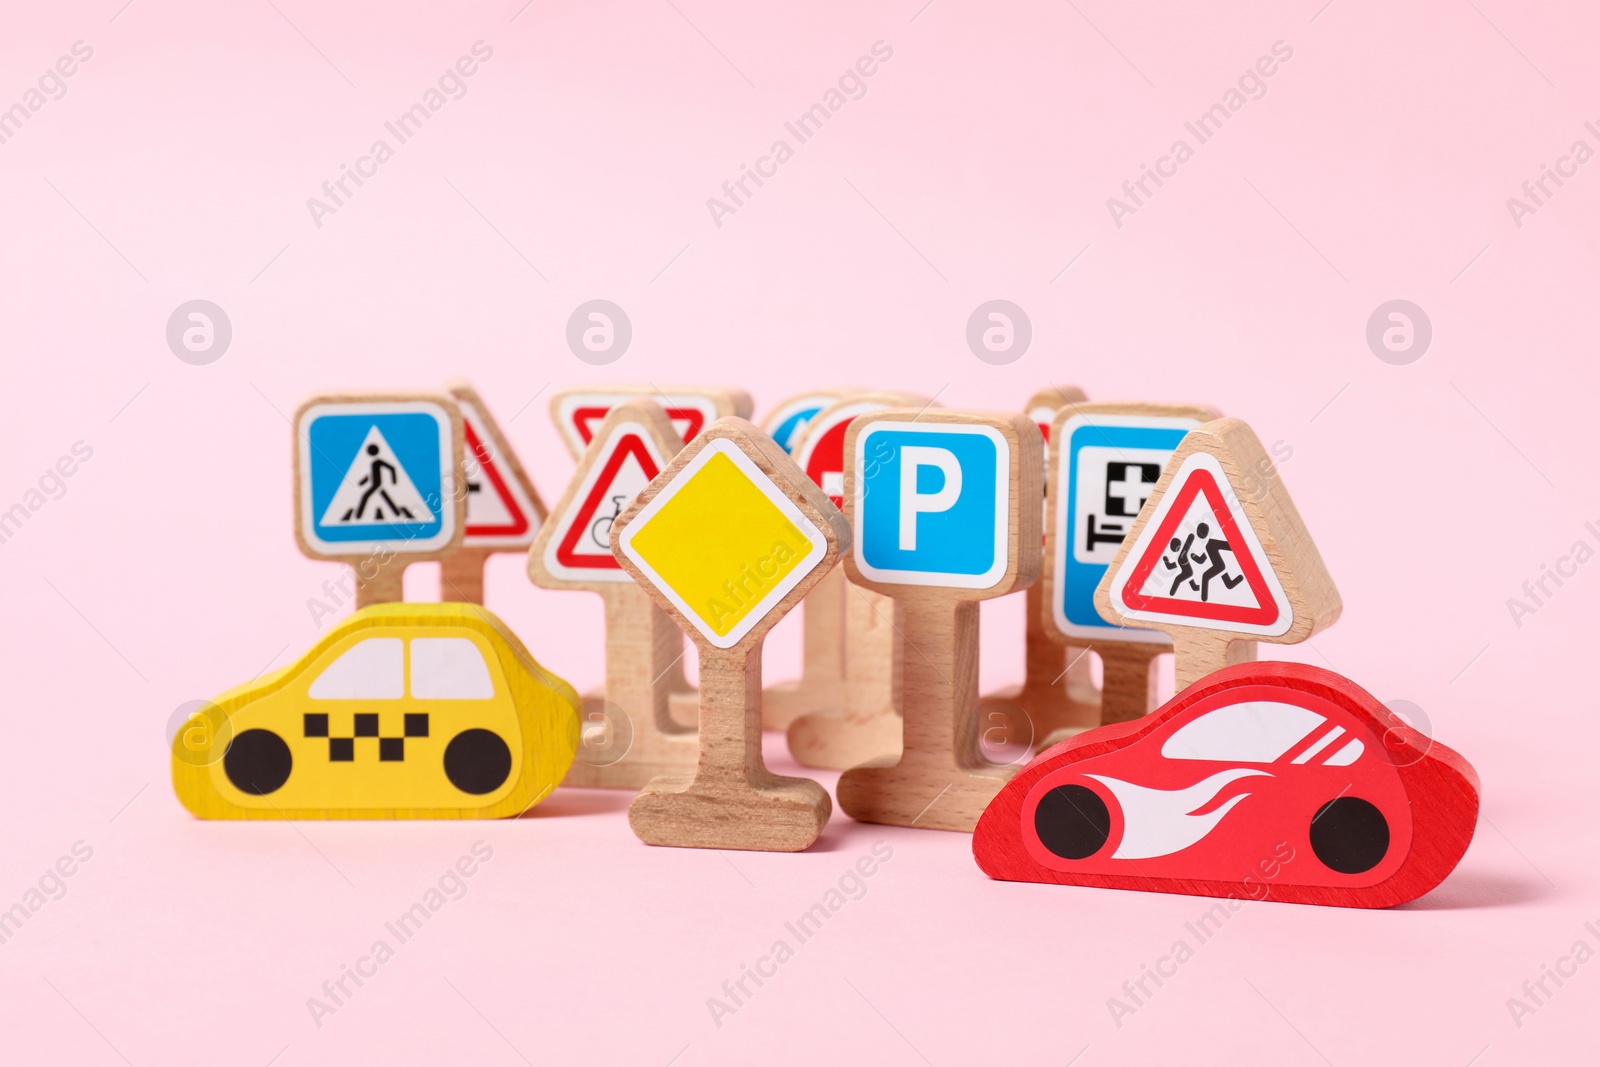 Photo of Set of wooden road signs and cars on light pink background. Children's toy